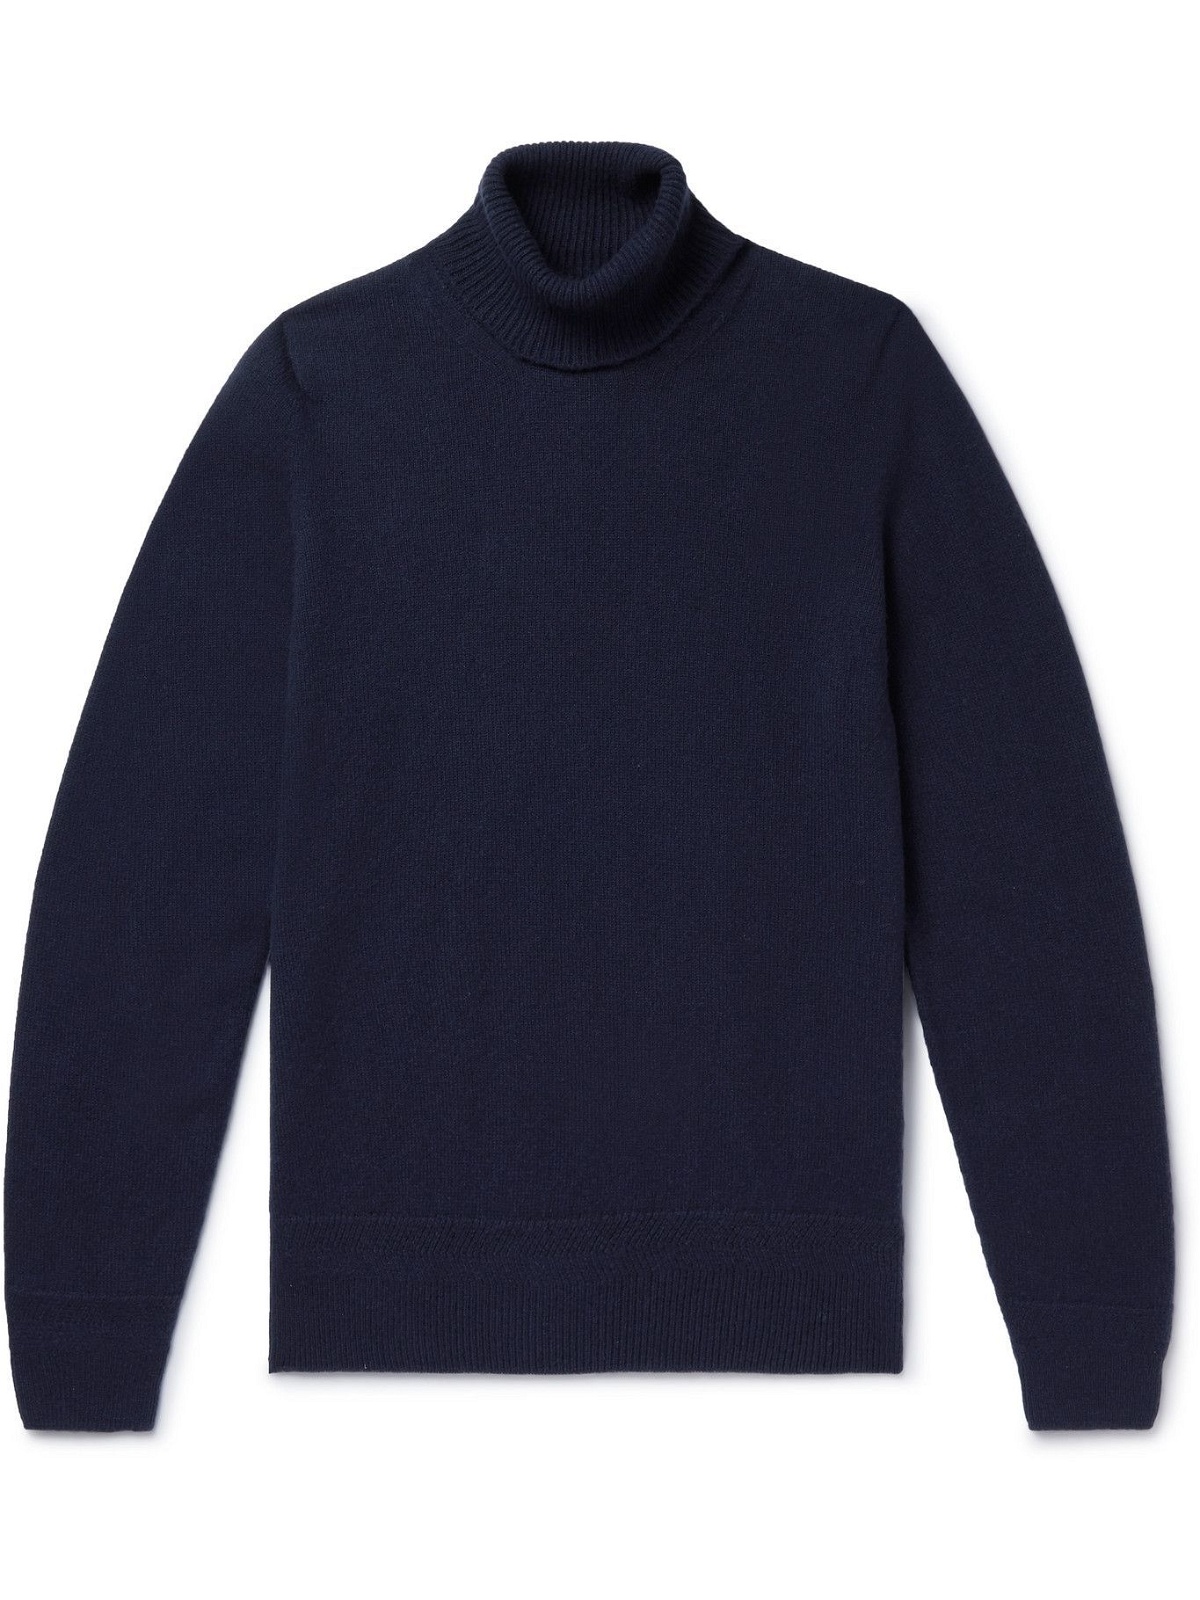 JOHN SMEDLEY - Kolton Slim-Fit Recycled Cashmere and Merino Wool-Blend ...